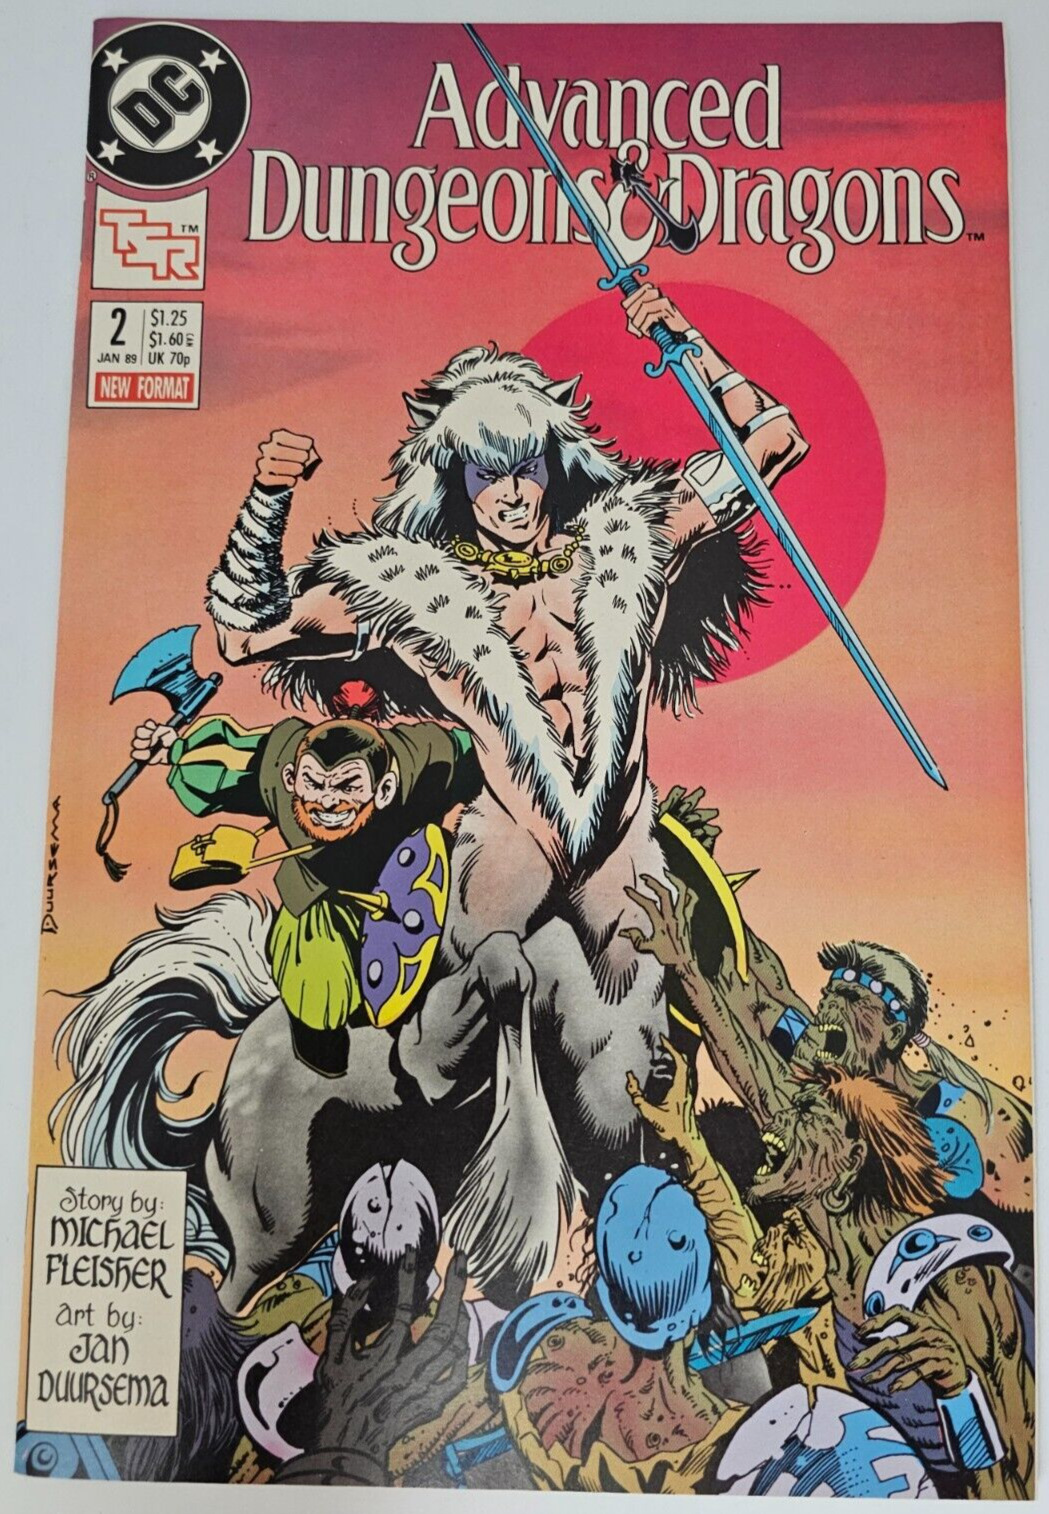 ADVANCED DUNGEONS and DRAGONS #2 NM 1988 DC COMIC BOOK TSR D&D RPG AD&D